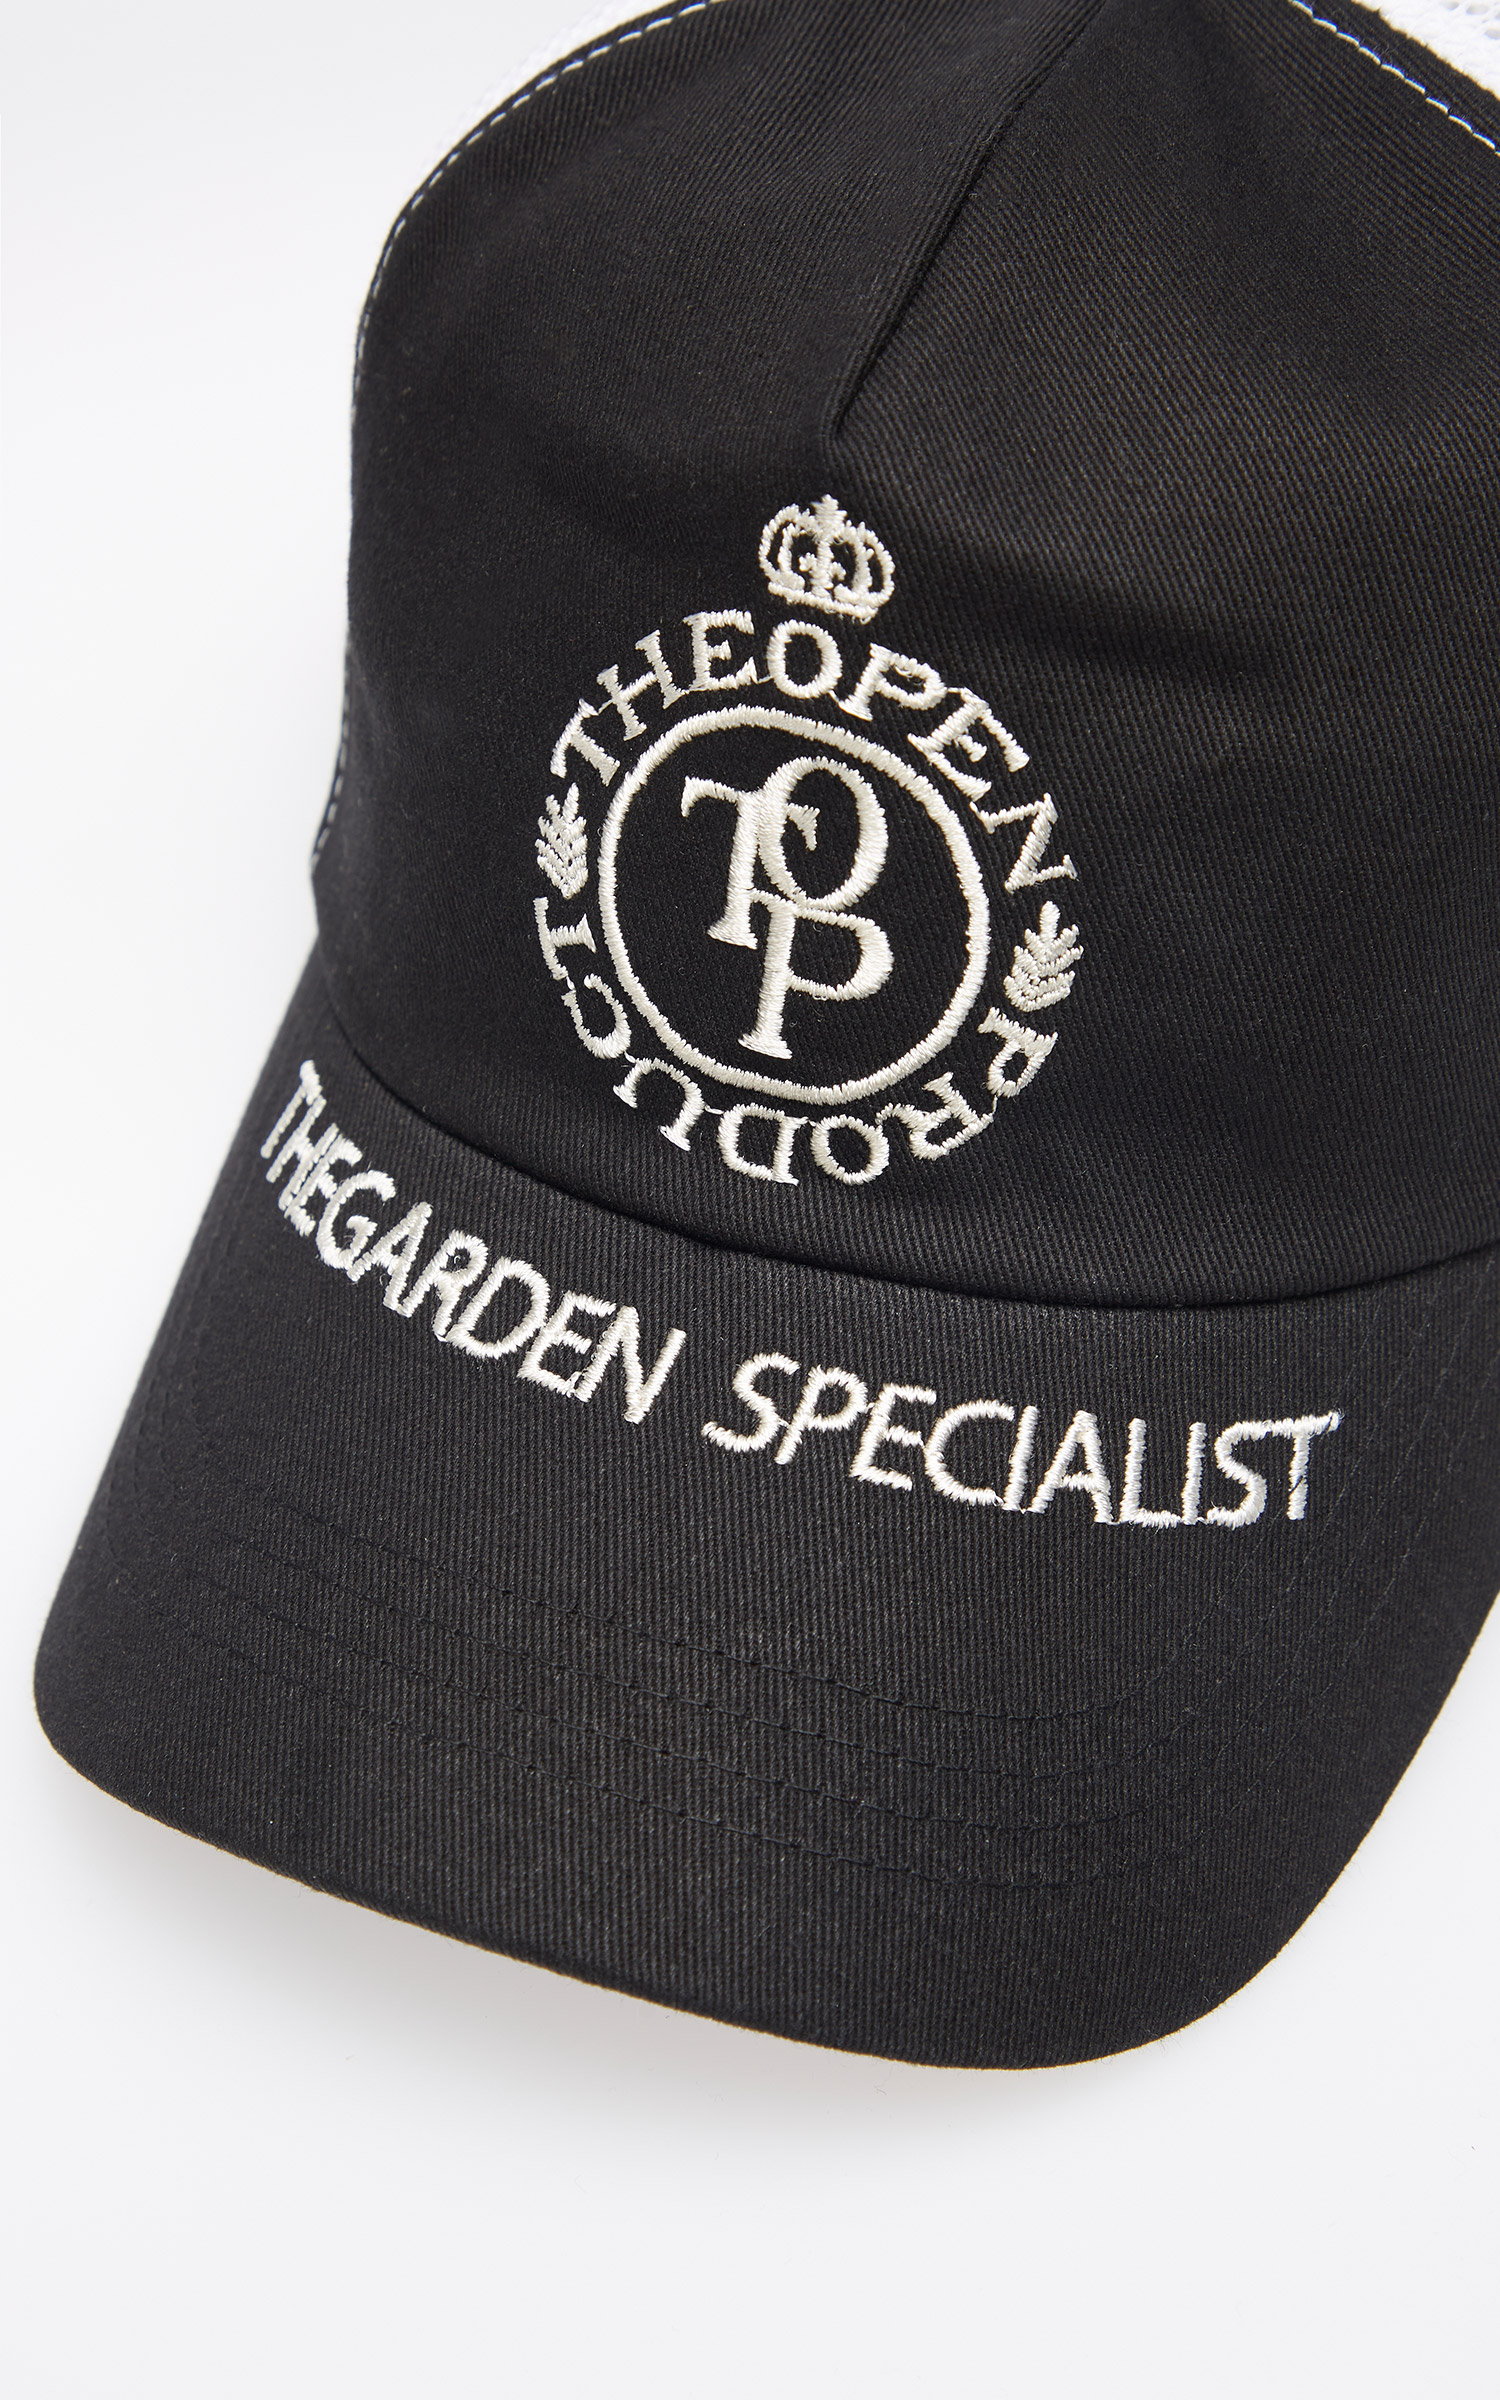 TheOpen Product The Garden Specialist Ball Cap Black | Cultizm